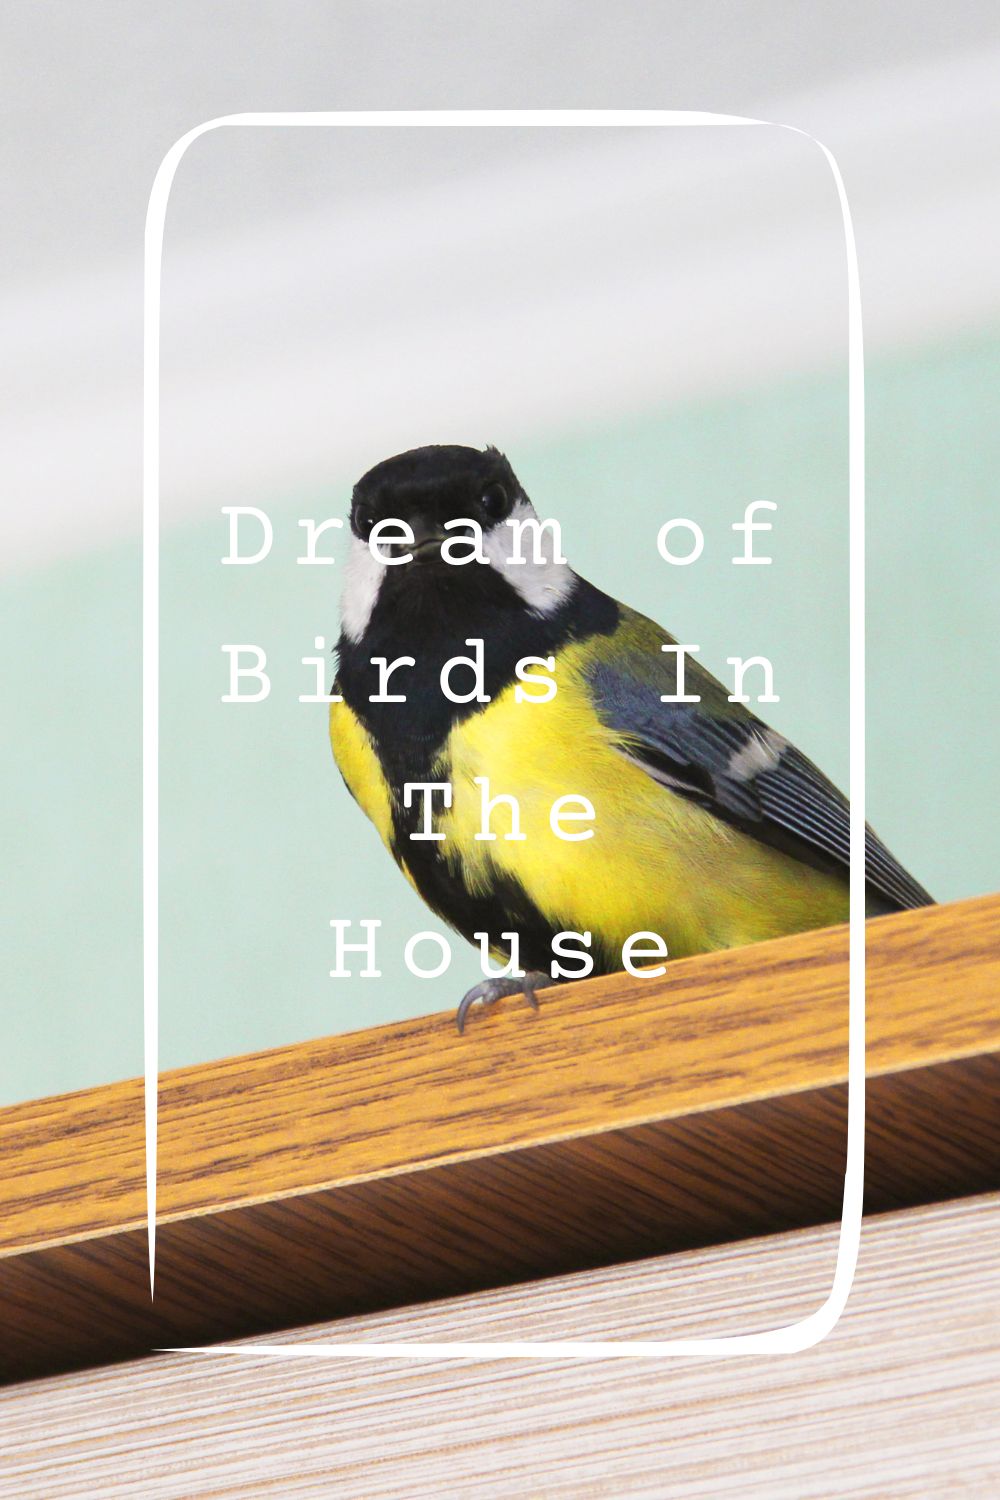 10 Dream of Birds In The House Meanings1